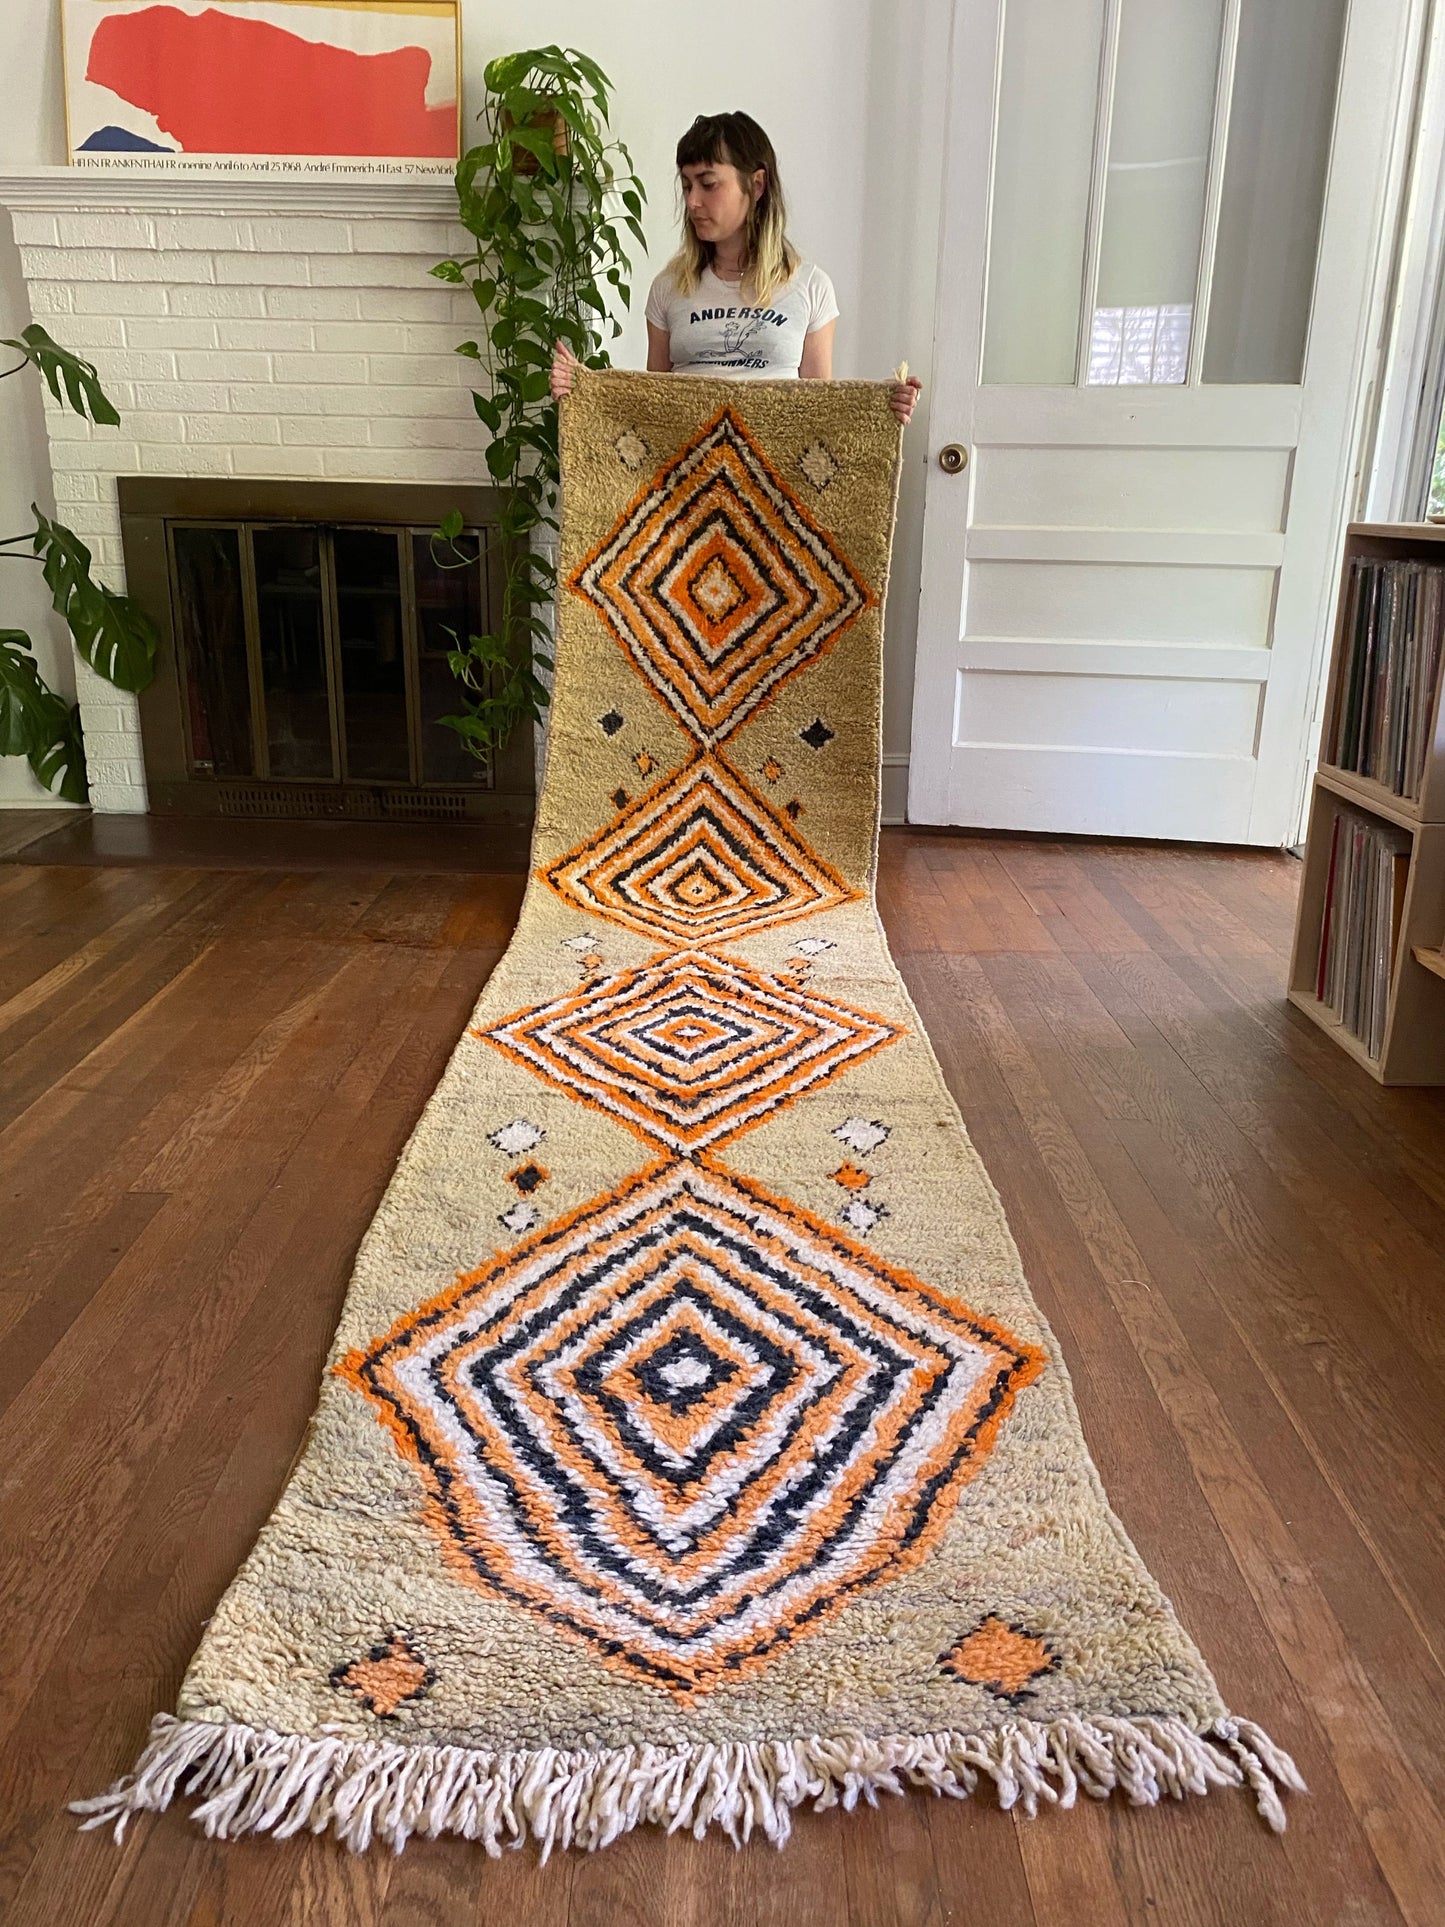 Pini Moroccan Runner is held showing the four big diamond motifs